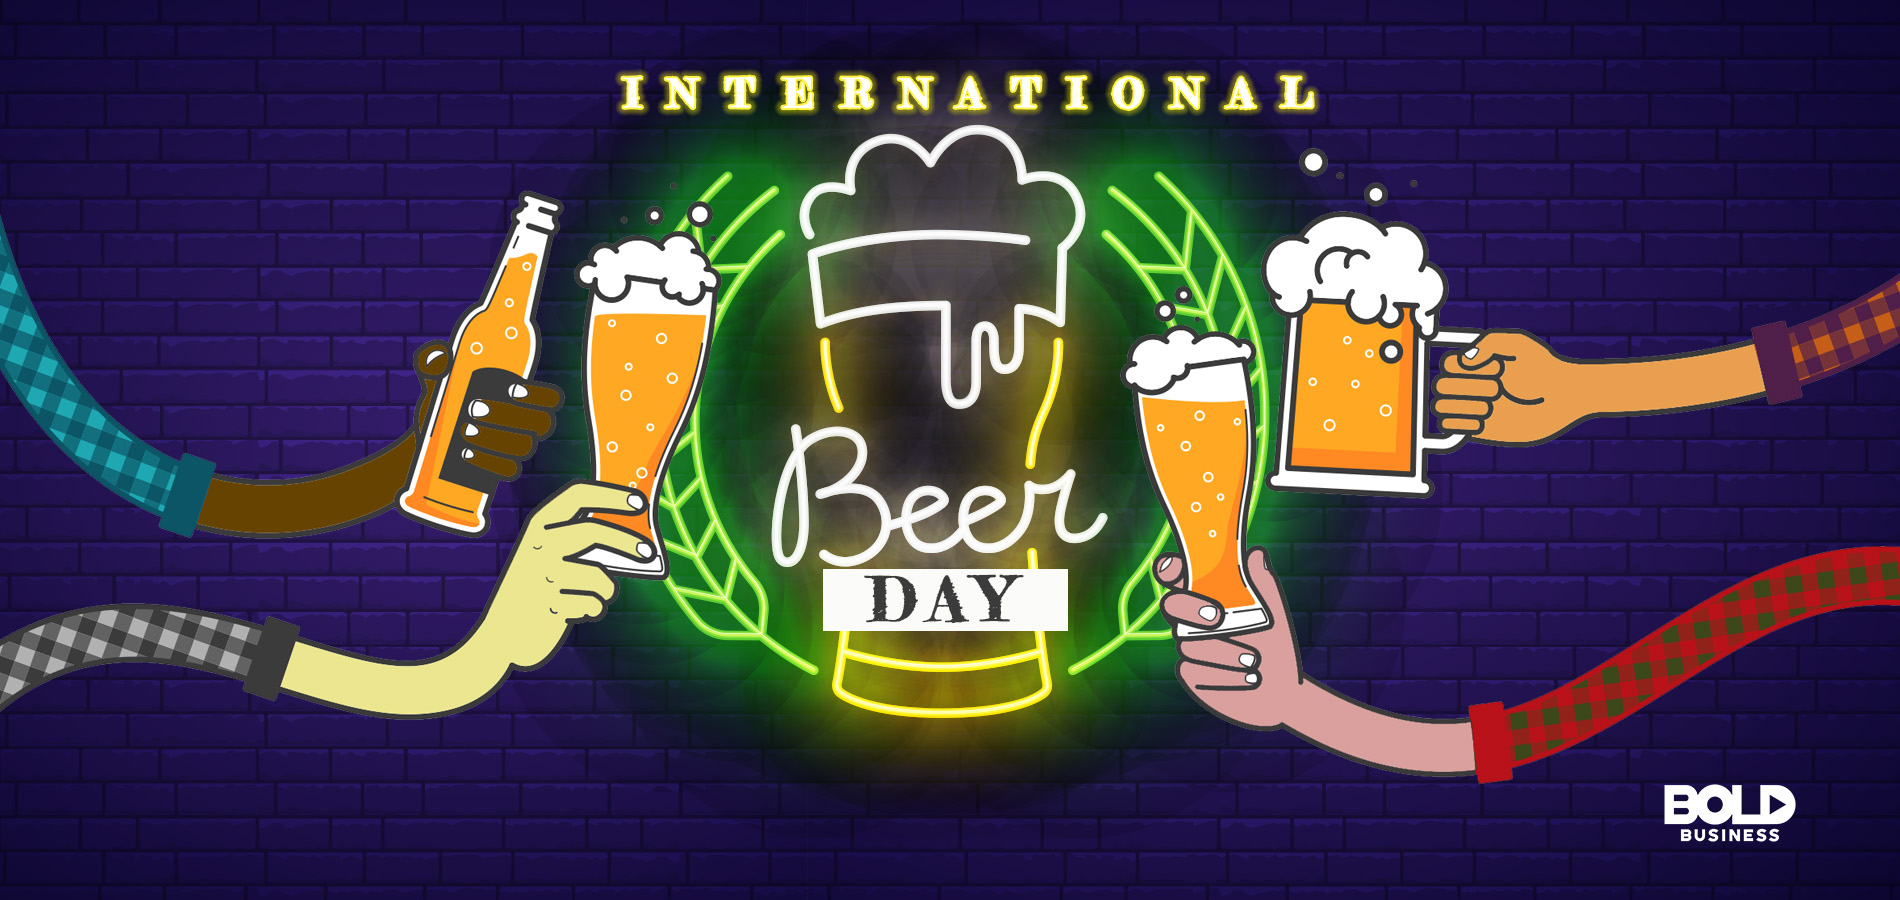 international beer day poster picture for facebook